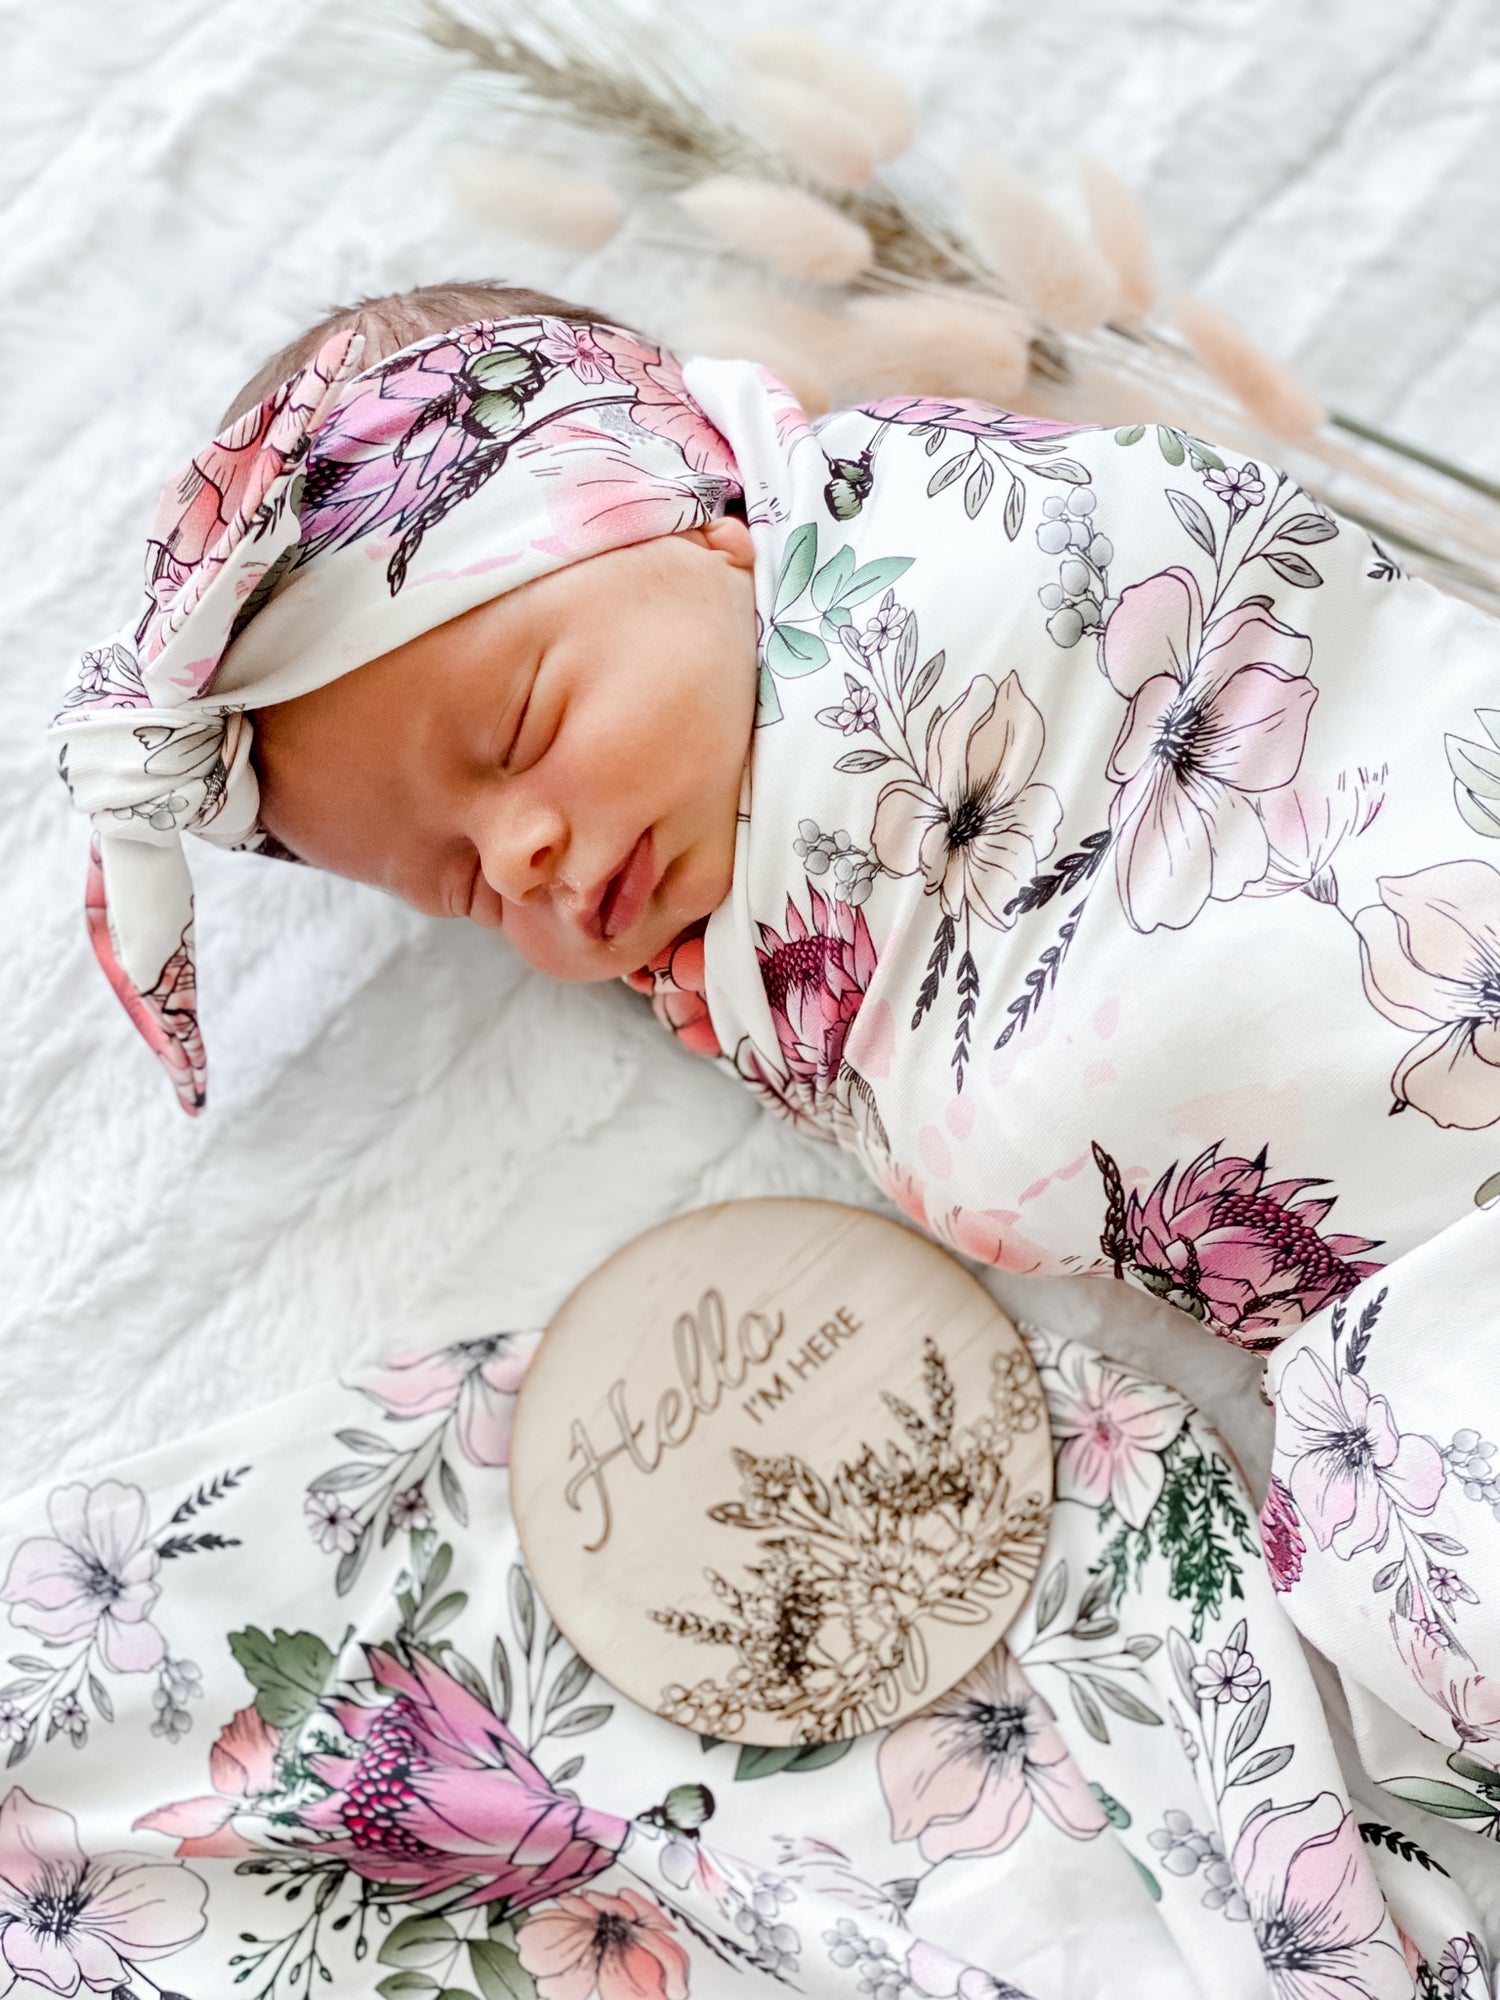 Organic jersey swaddles from Snuggly Jacks are now available in Hong Kong on Sugarbird Kids.